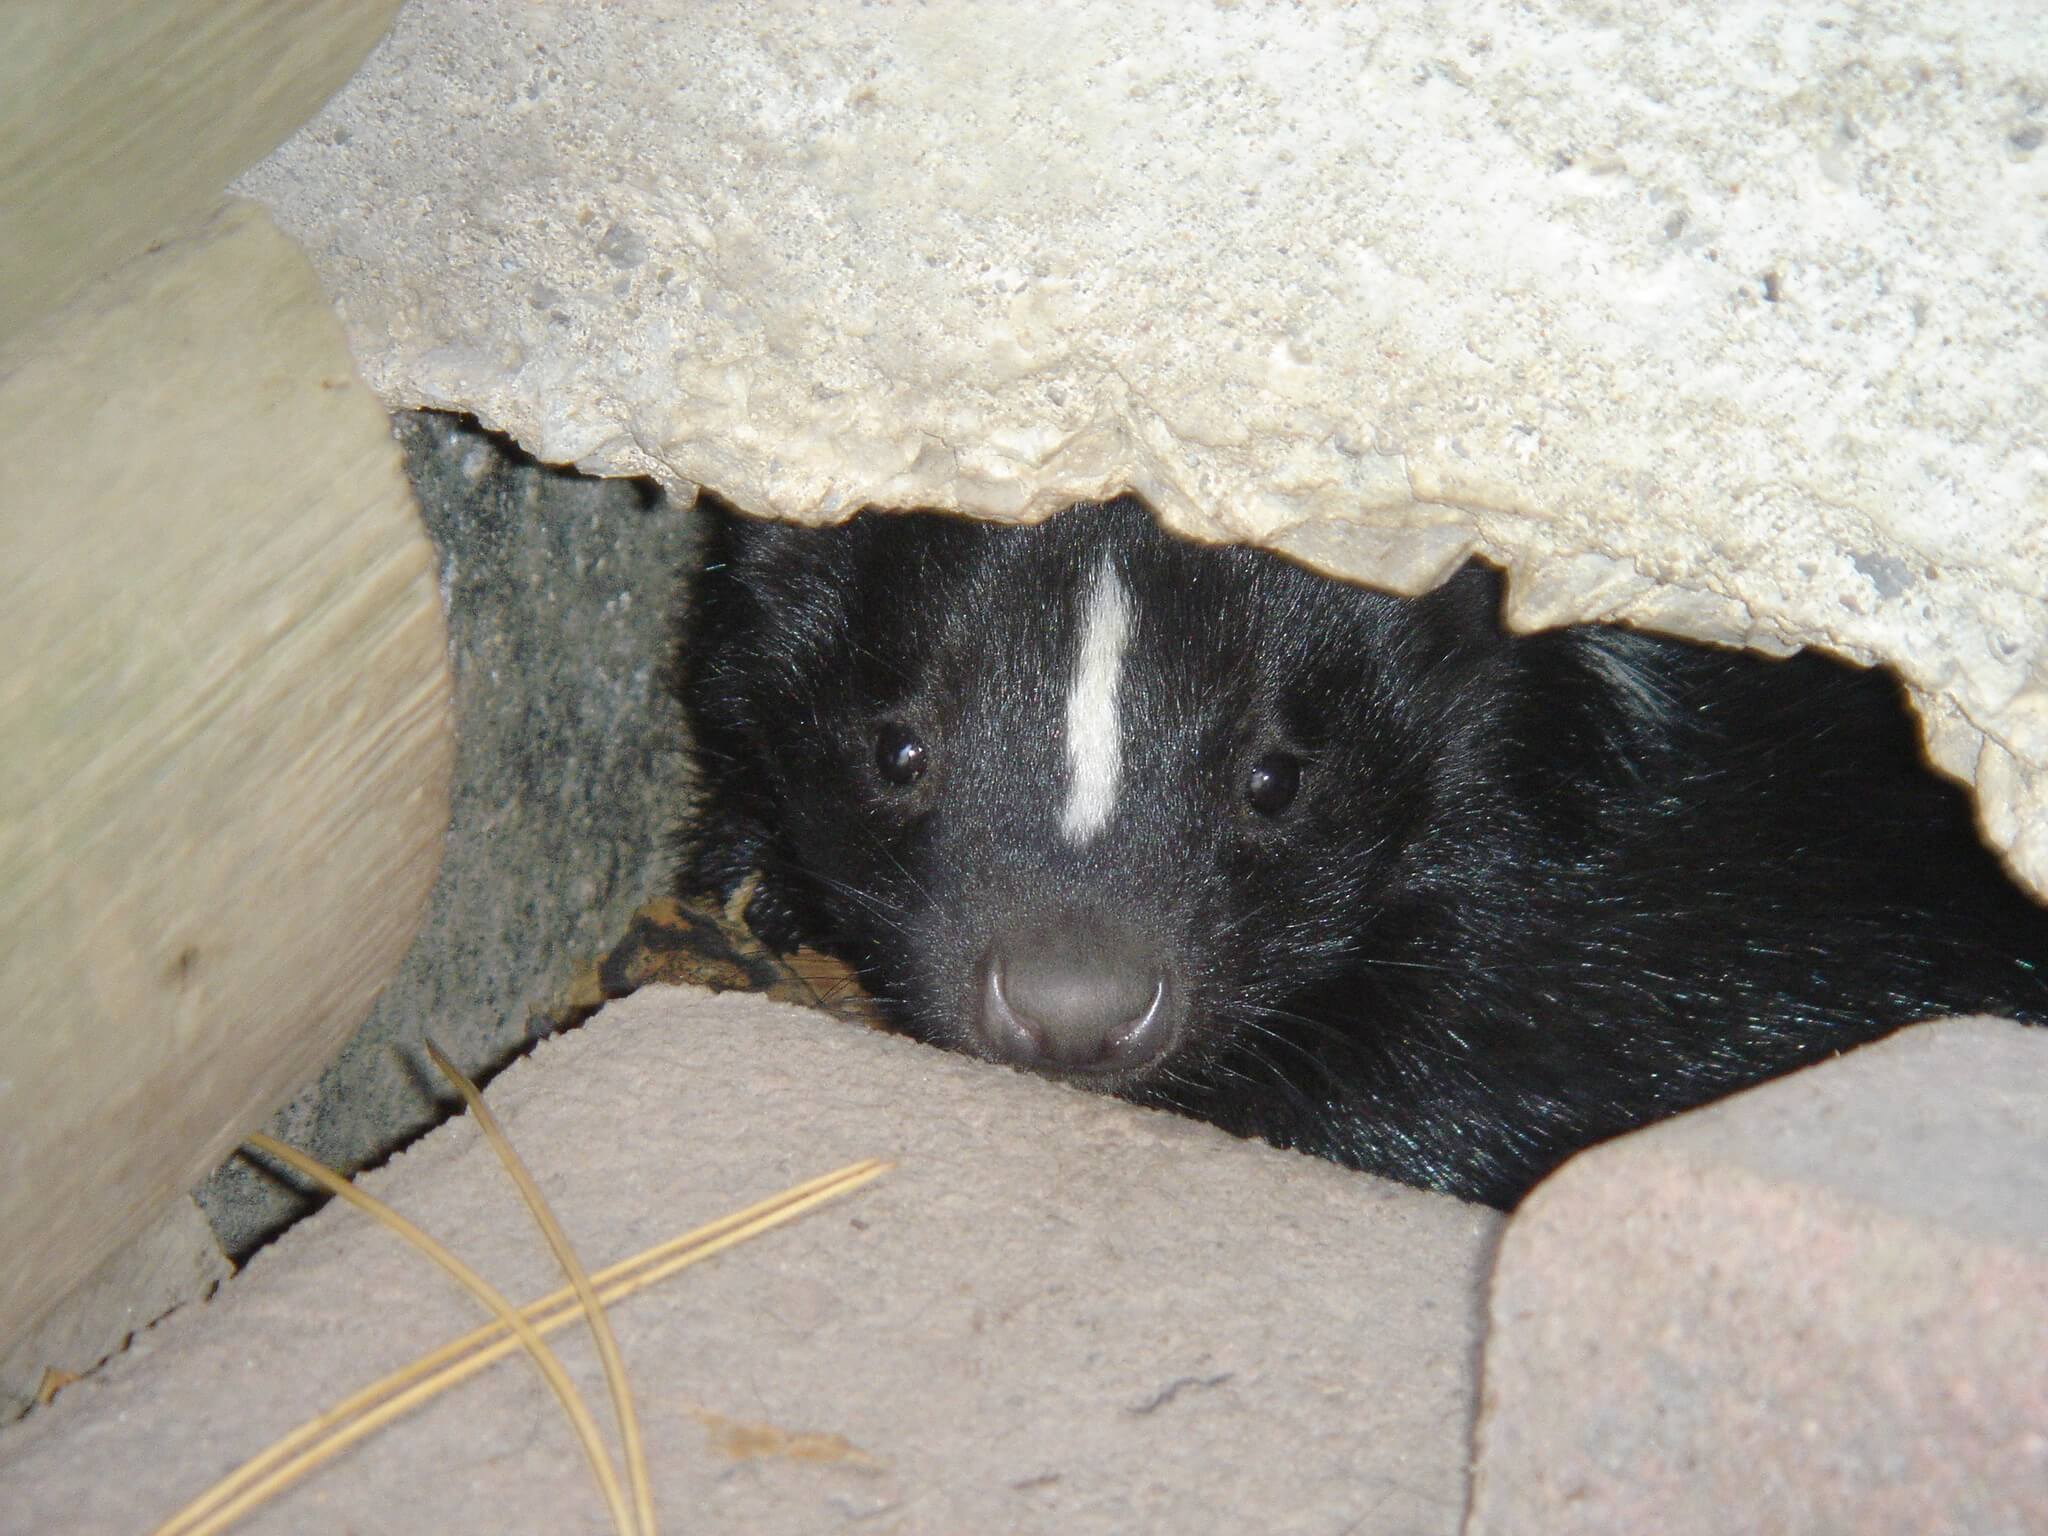 5 Ways To Keep Skunks From Nesting on Your Property